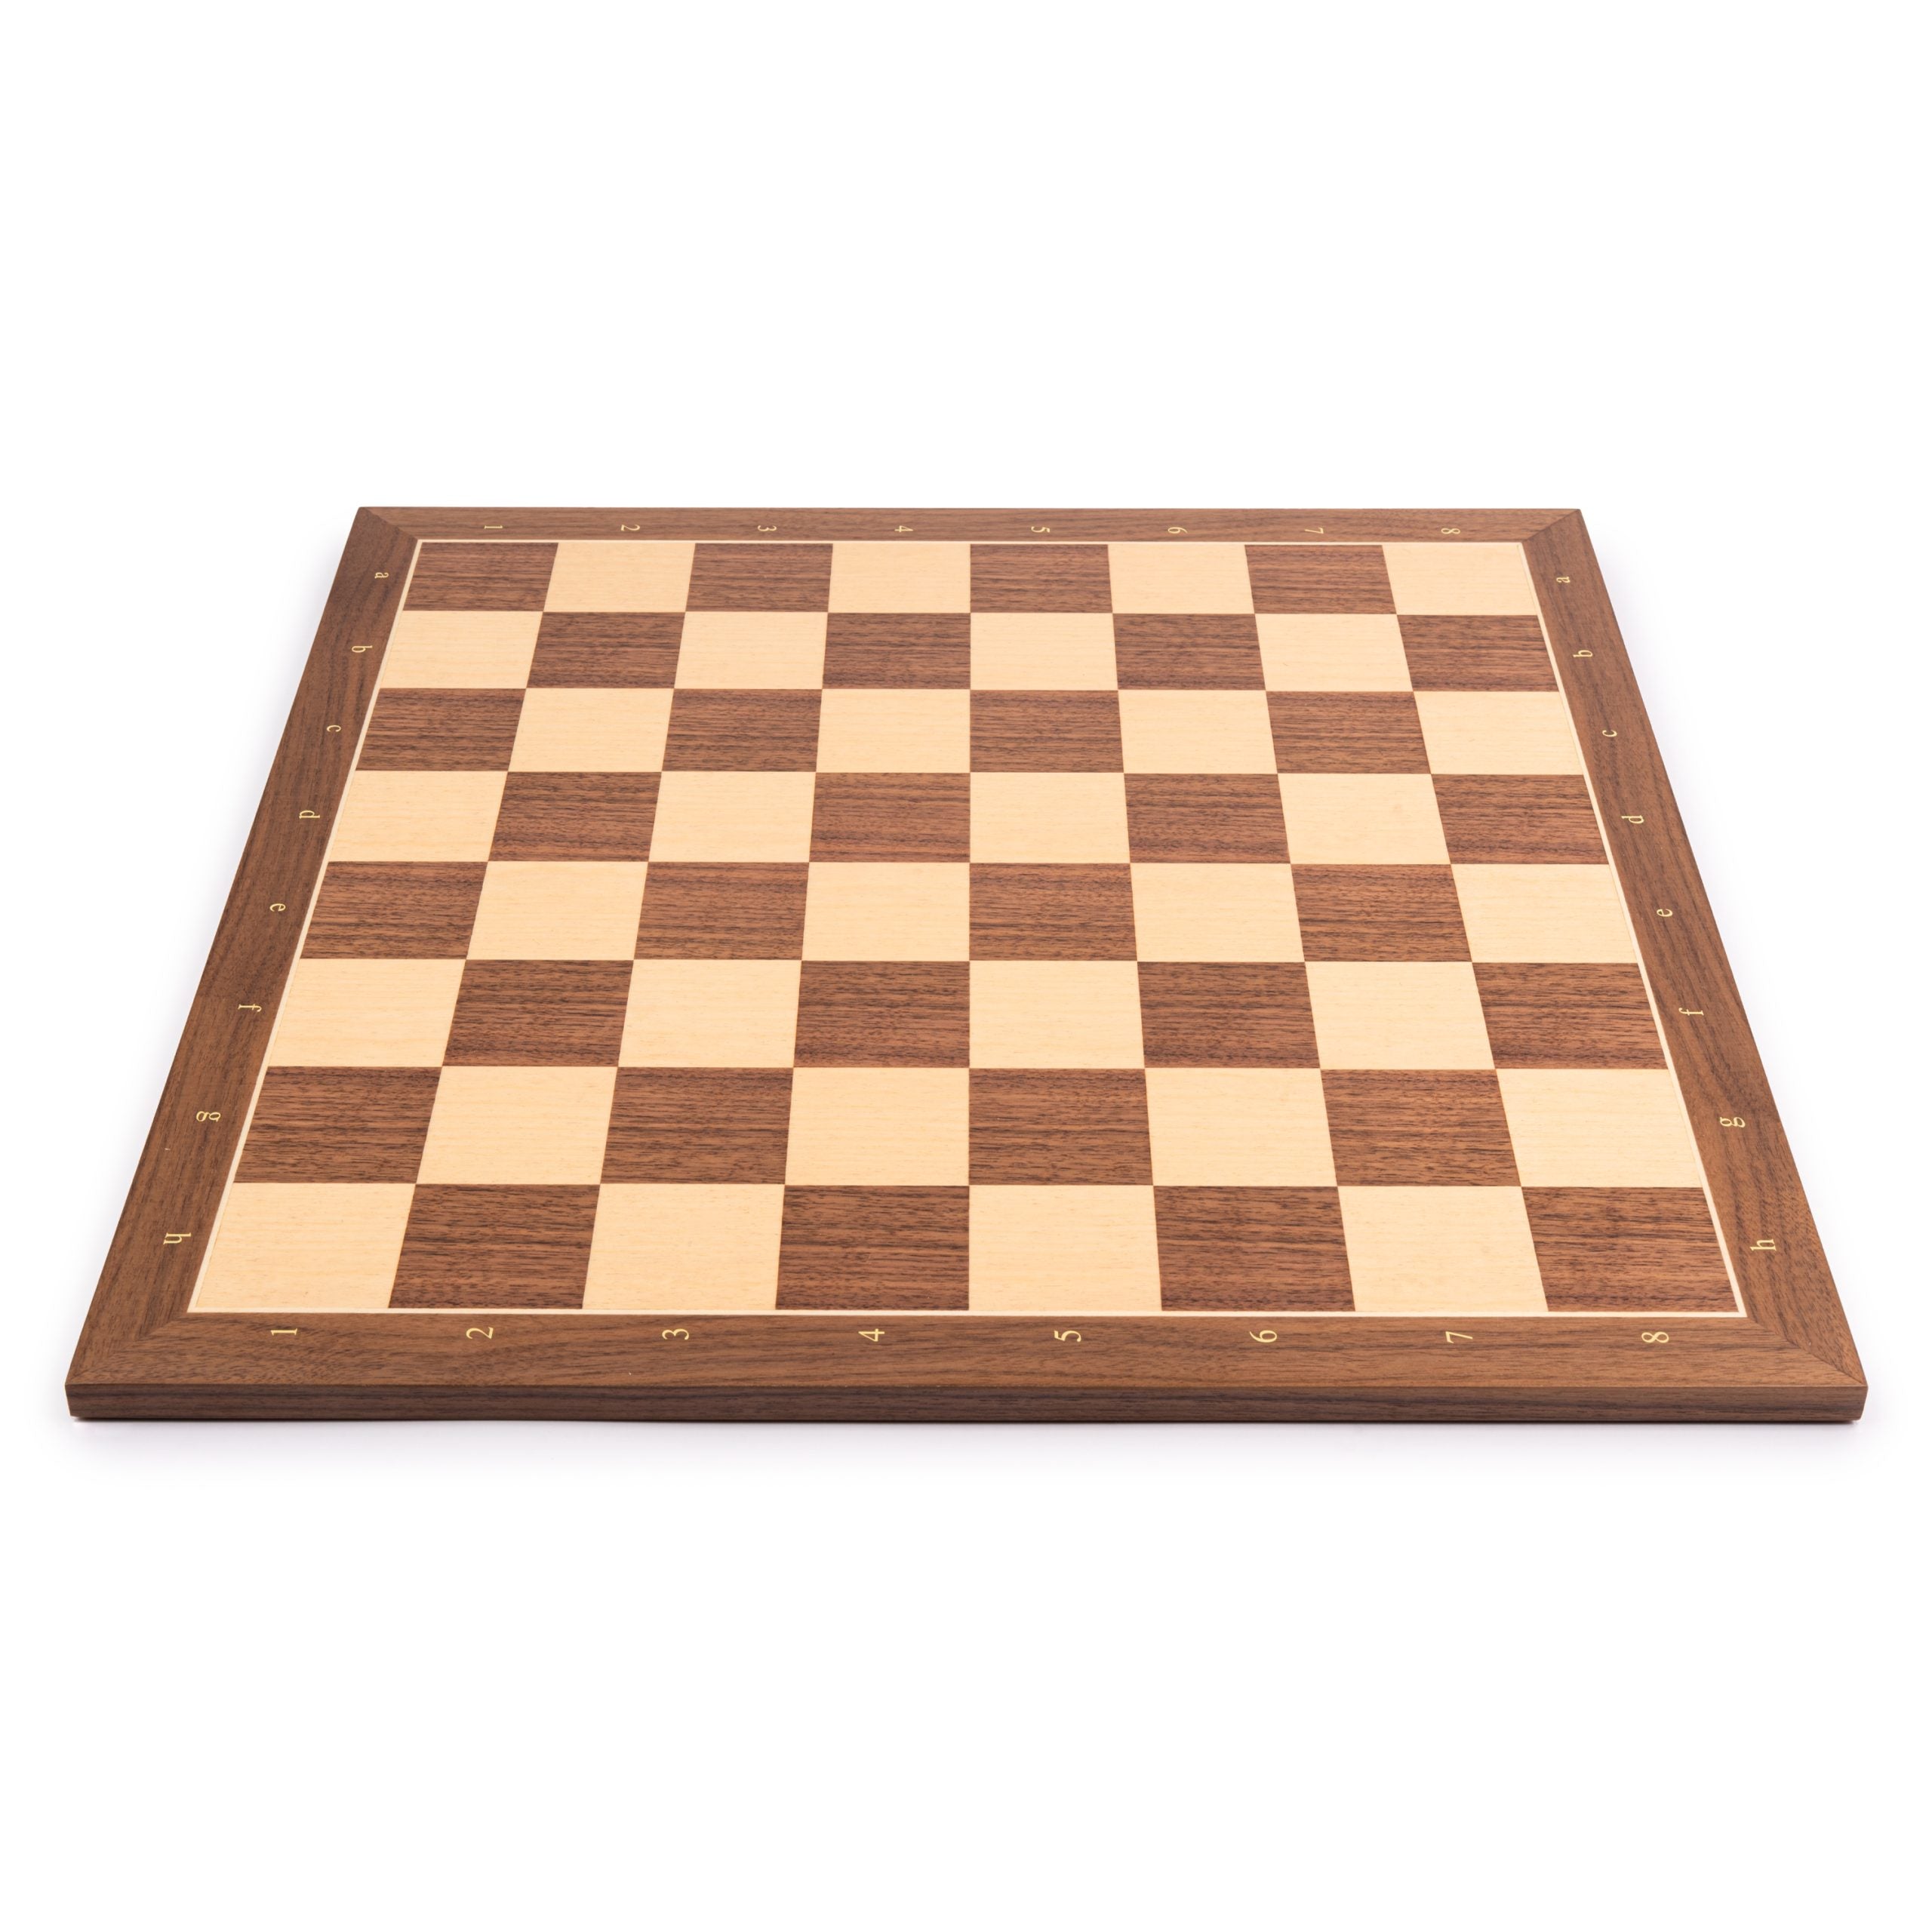 High-quality walnut wooden board with notation, 45mm field size